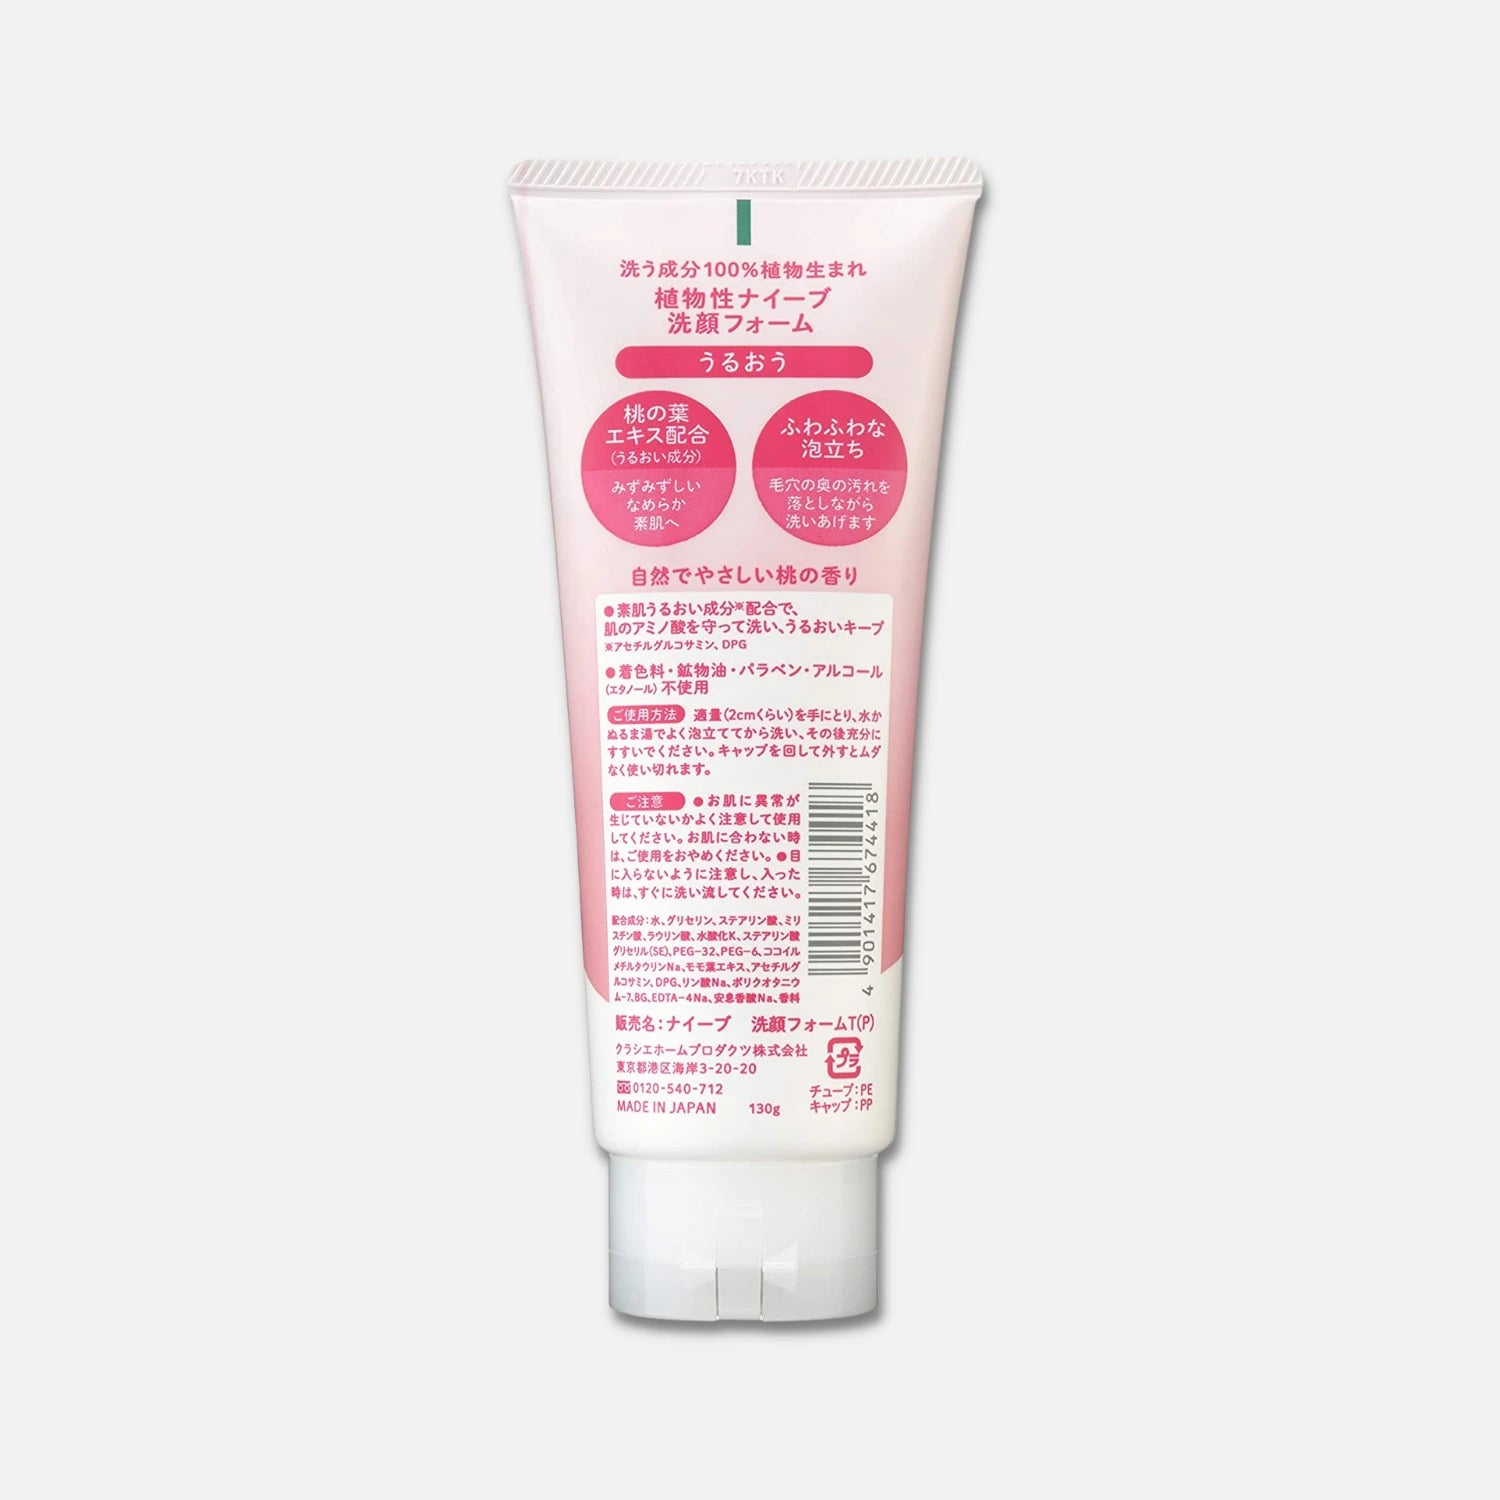 Naive Face Wash Foam Peach Leaf Extract 130g - Buy Me Japan